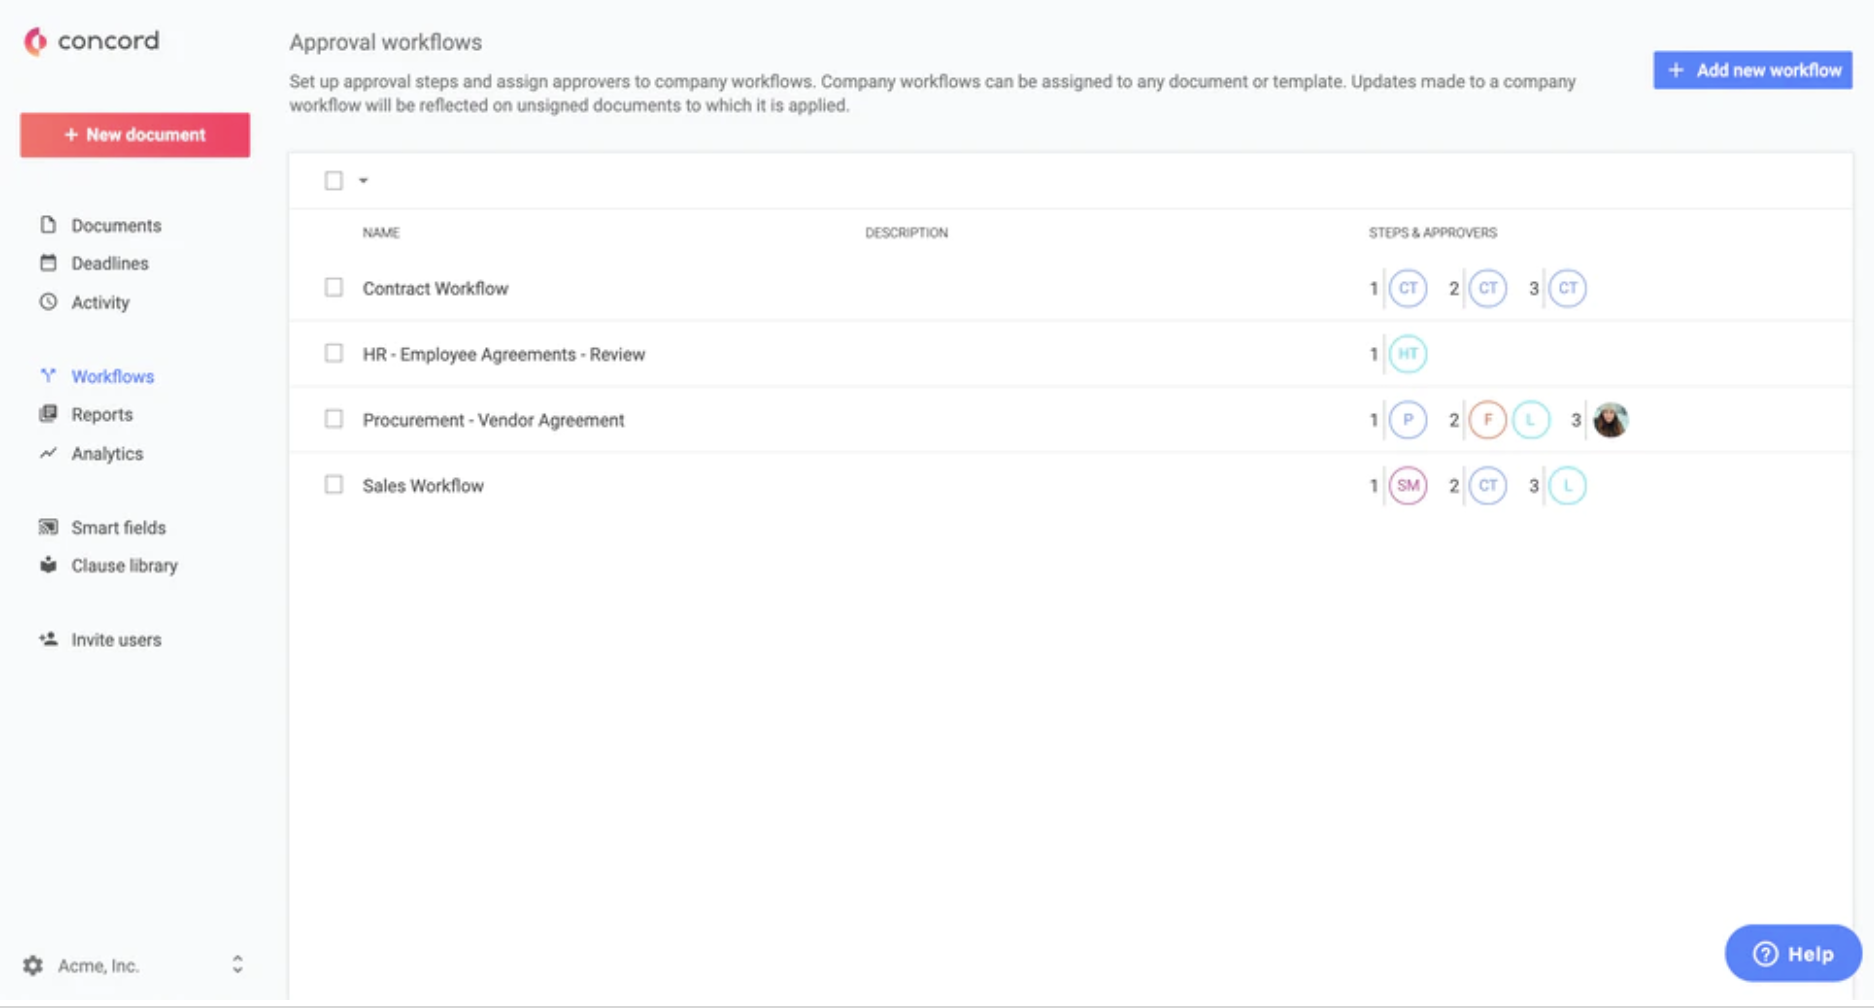 Concord approval workflows